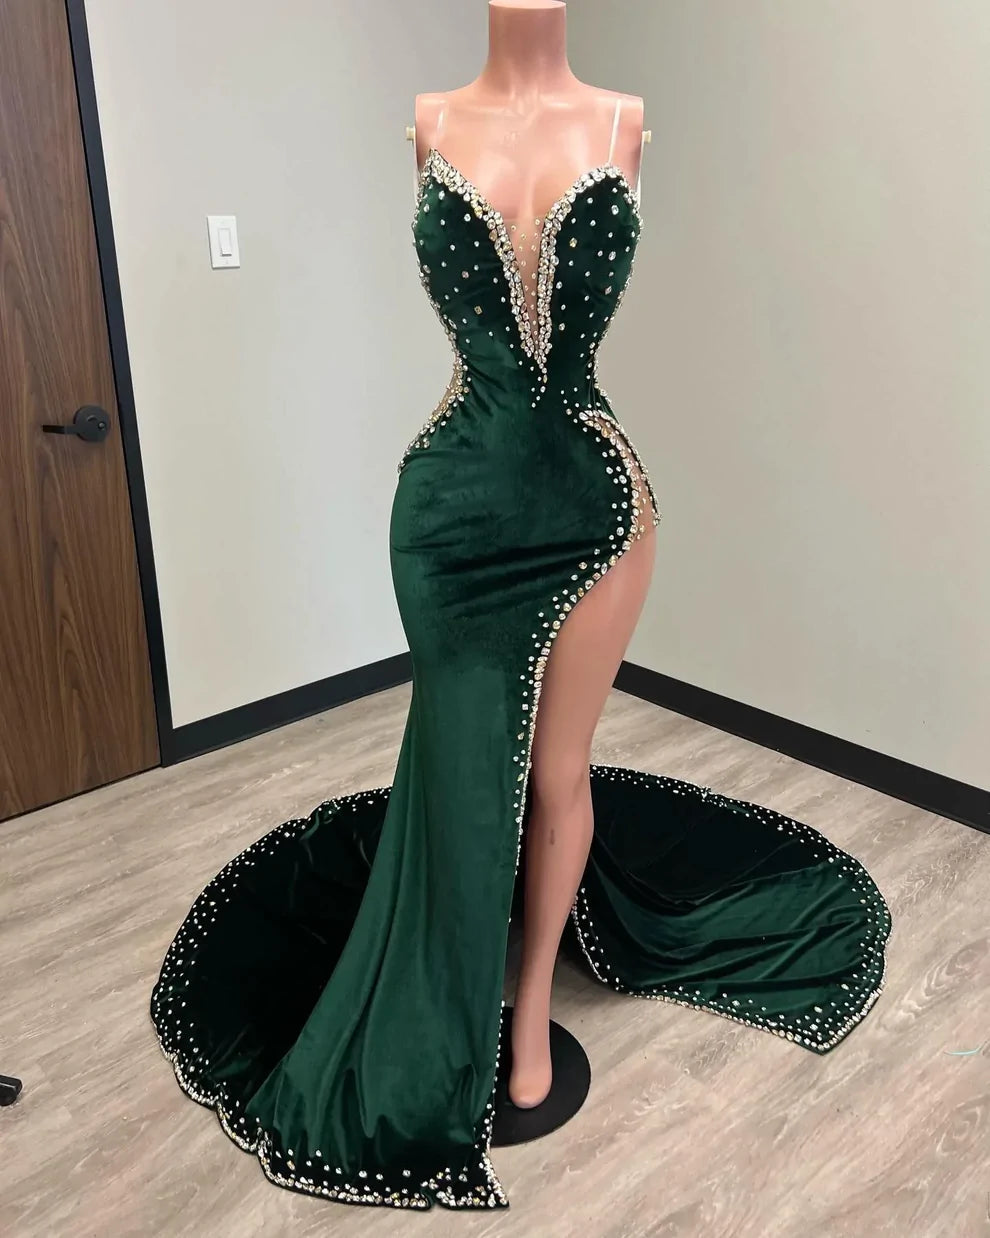 Black Girl Corset Prom Dresses Long Mermaid Green Corset Prom Gown With Train outfit, Party Dresses Black And Gold